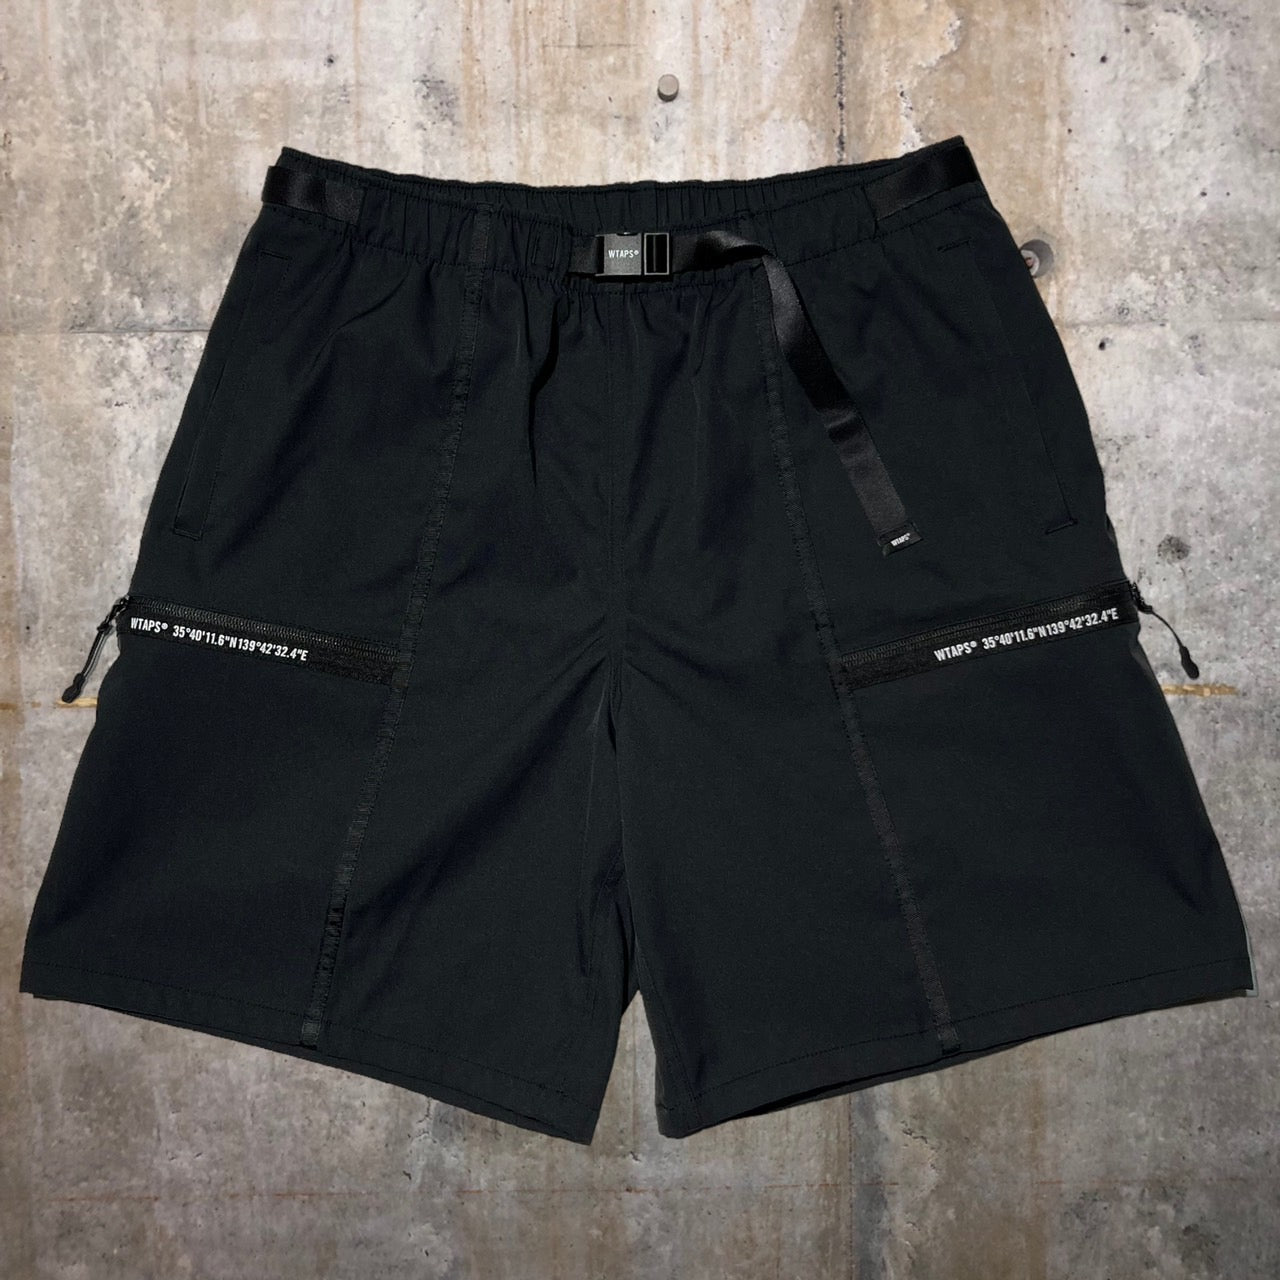 WTAPS(ダブルタップス) 23ss SPSS2001 / SHORTS / POLY. TWILL/ハーフ 